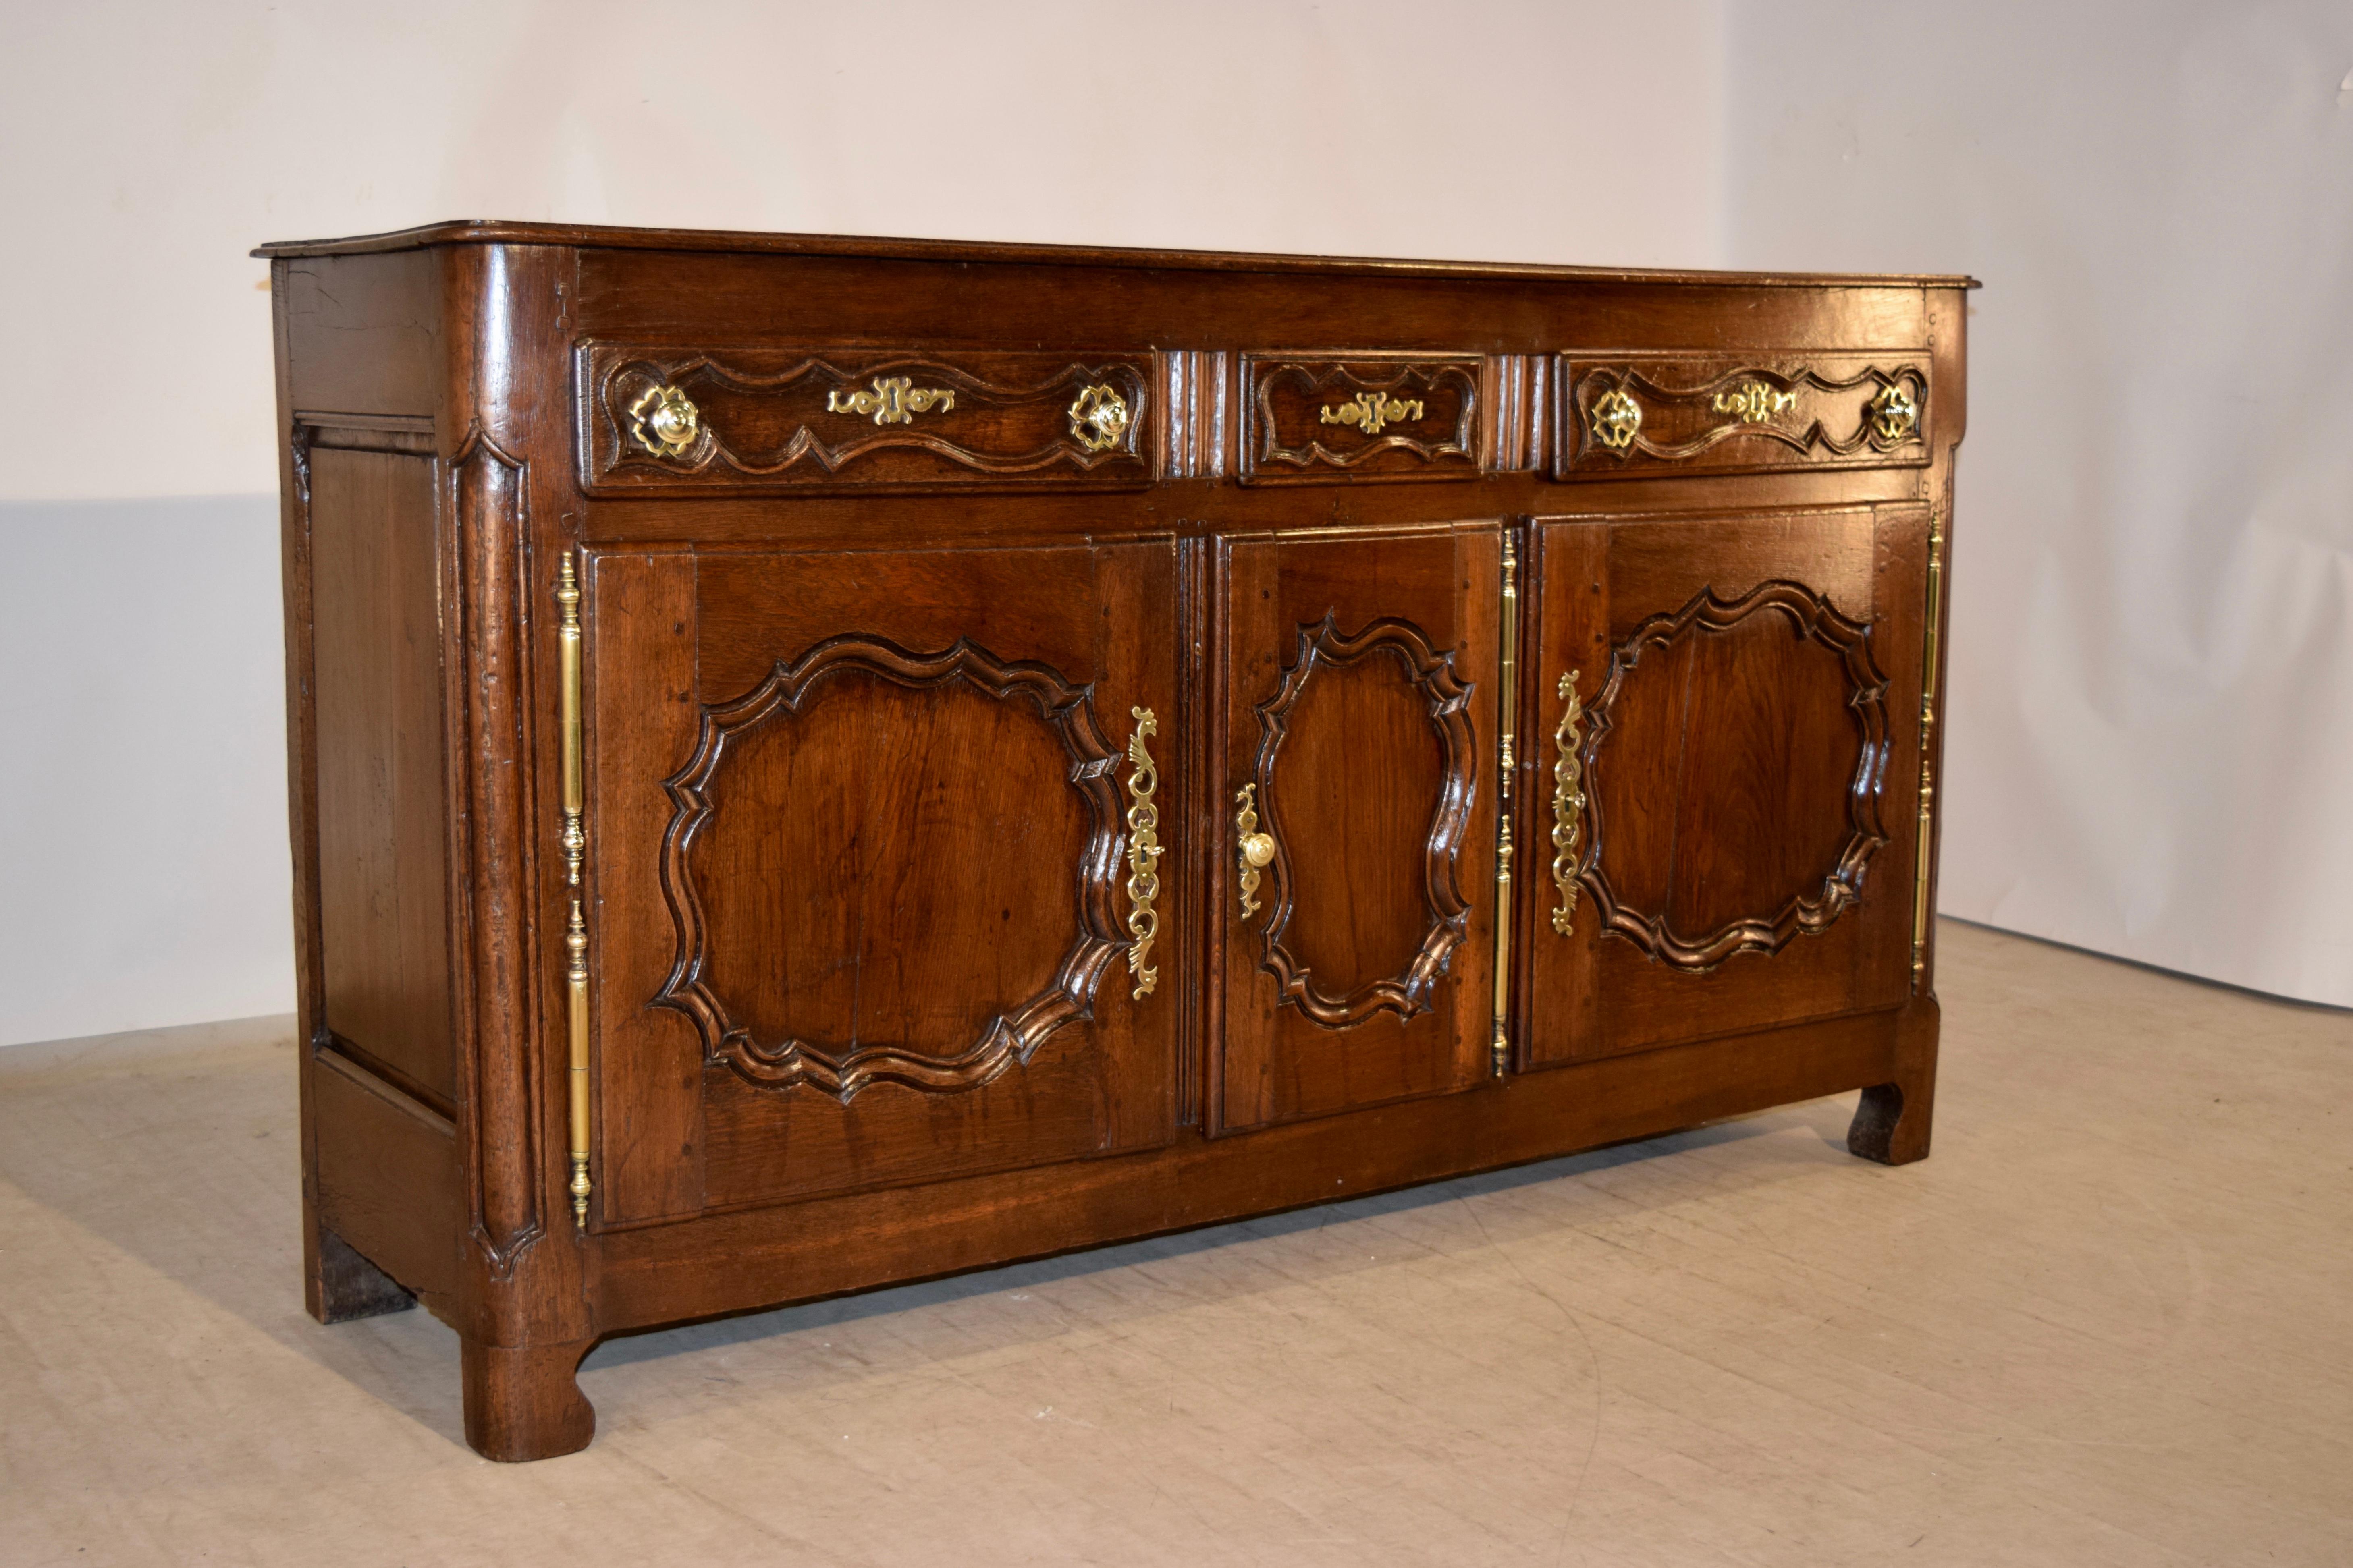 18th century oak enfilade from France. The top is made of planks and has rounded and beveled edges, following down to an elegant case with simple lines. There are three drawers over three doors, all with hand-carved elegantly scalloped panels. The